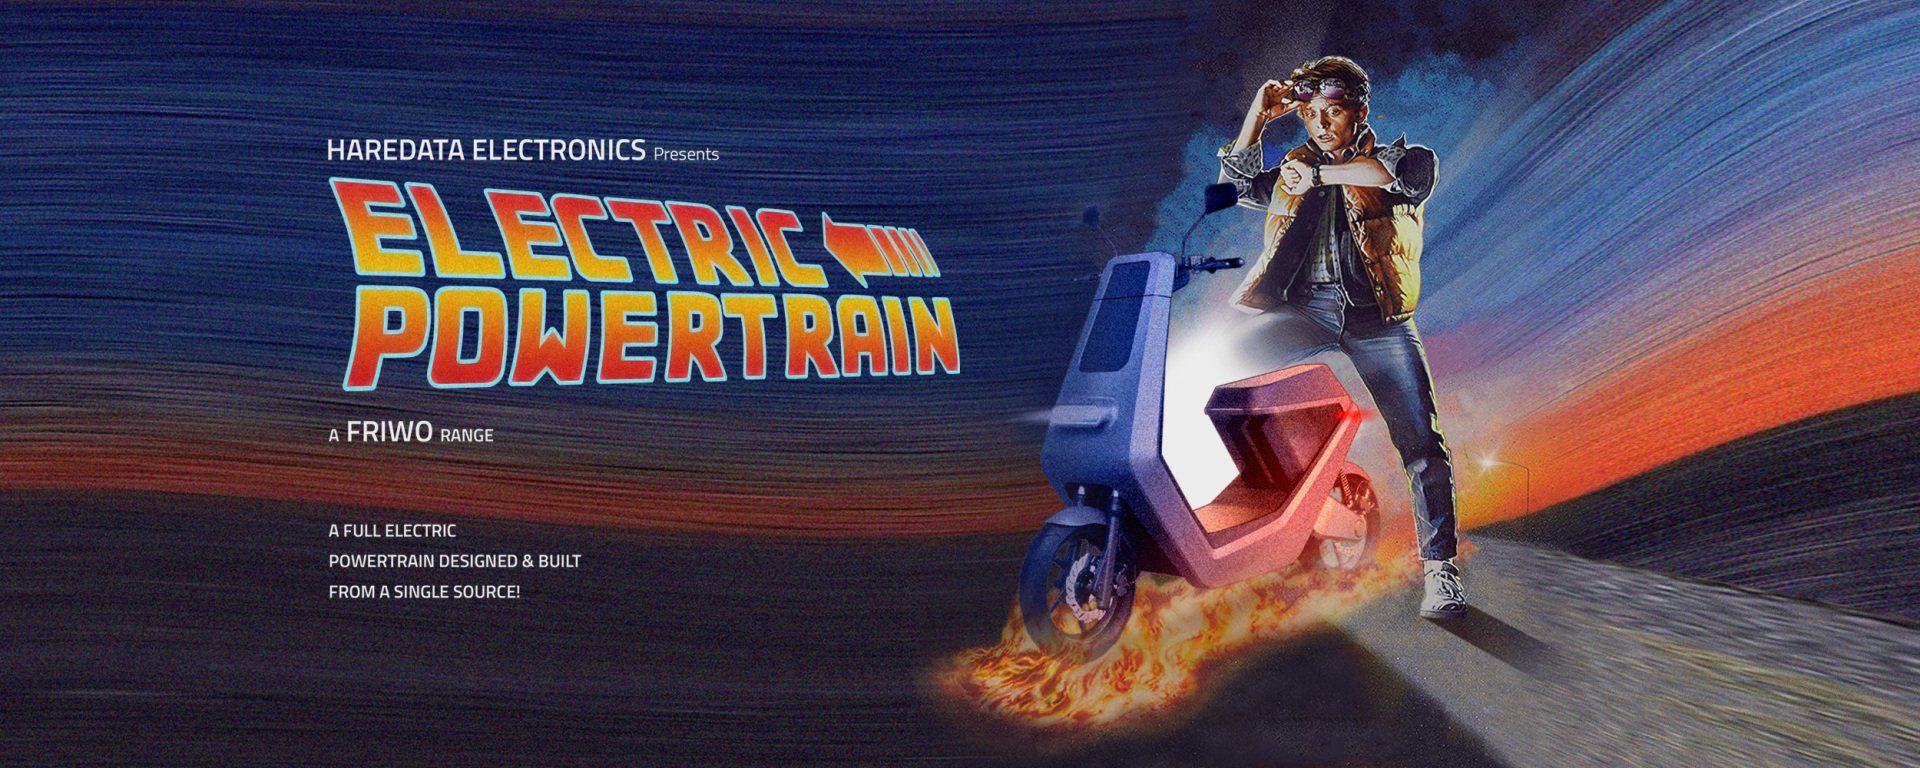 back to the future parody